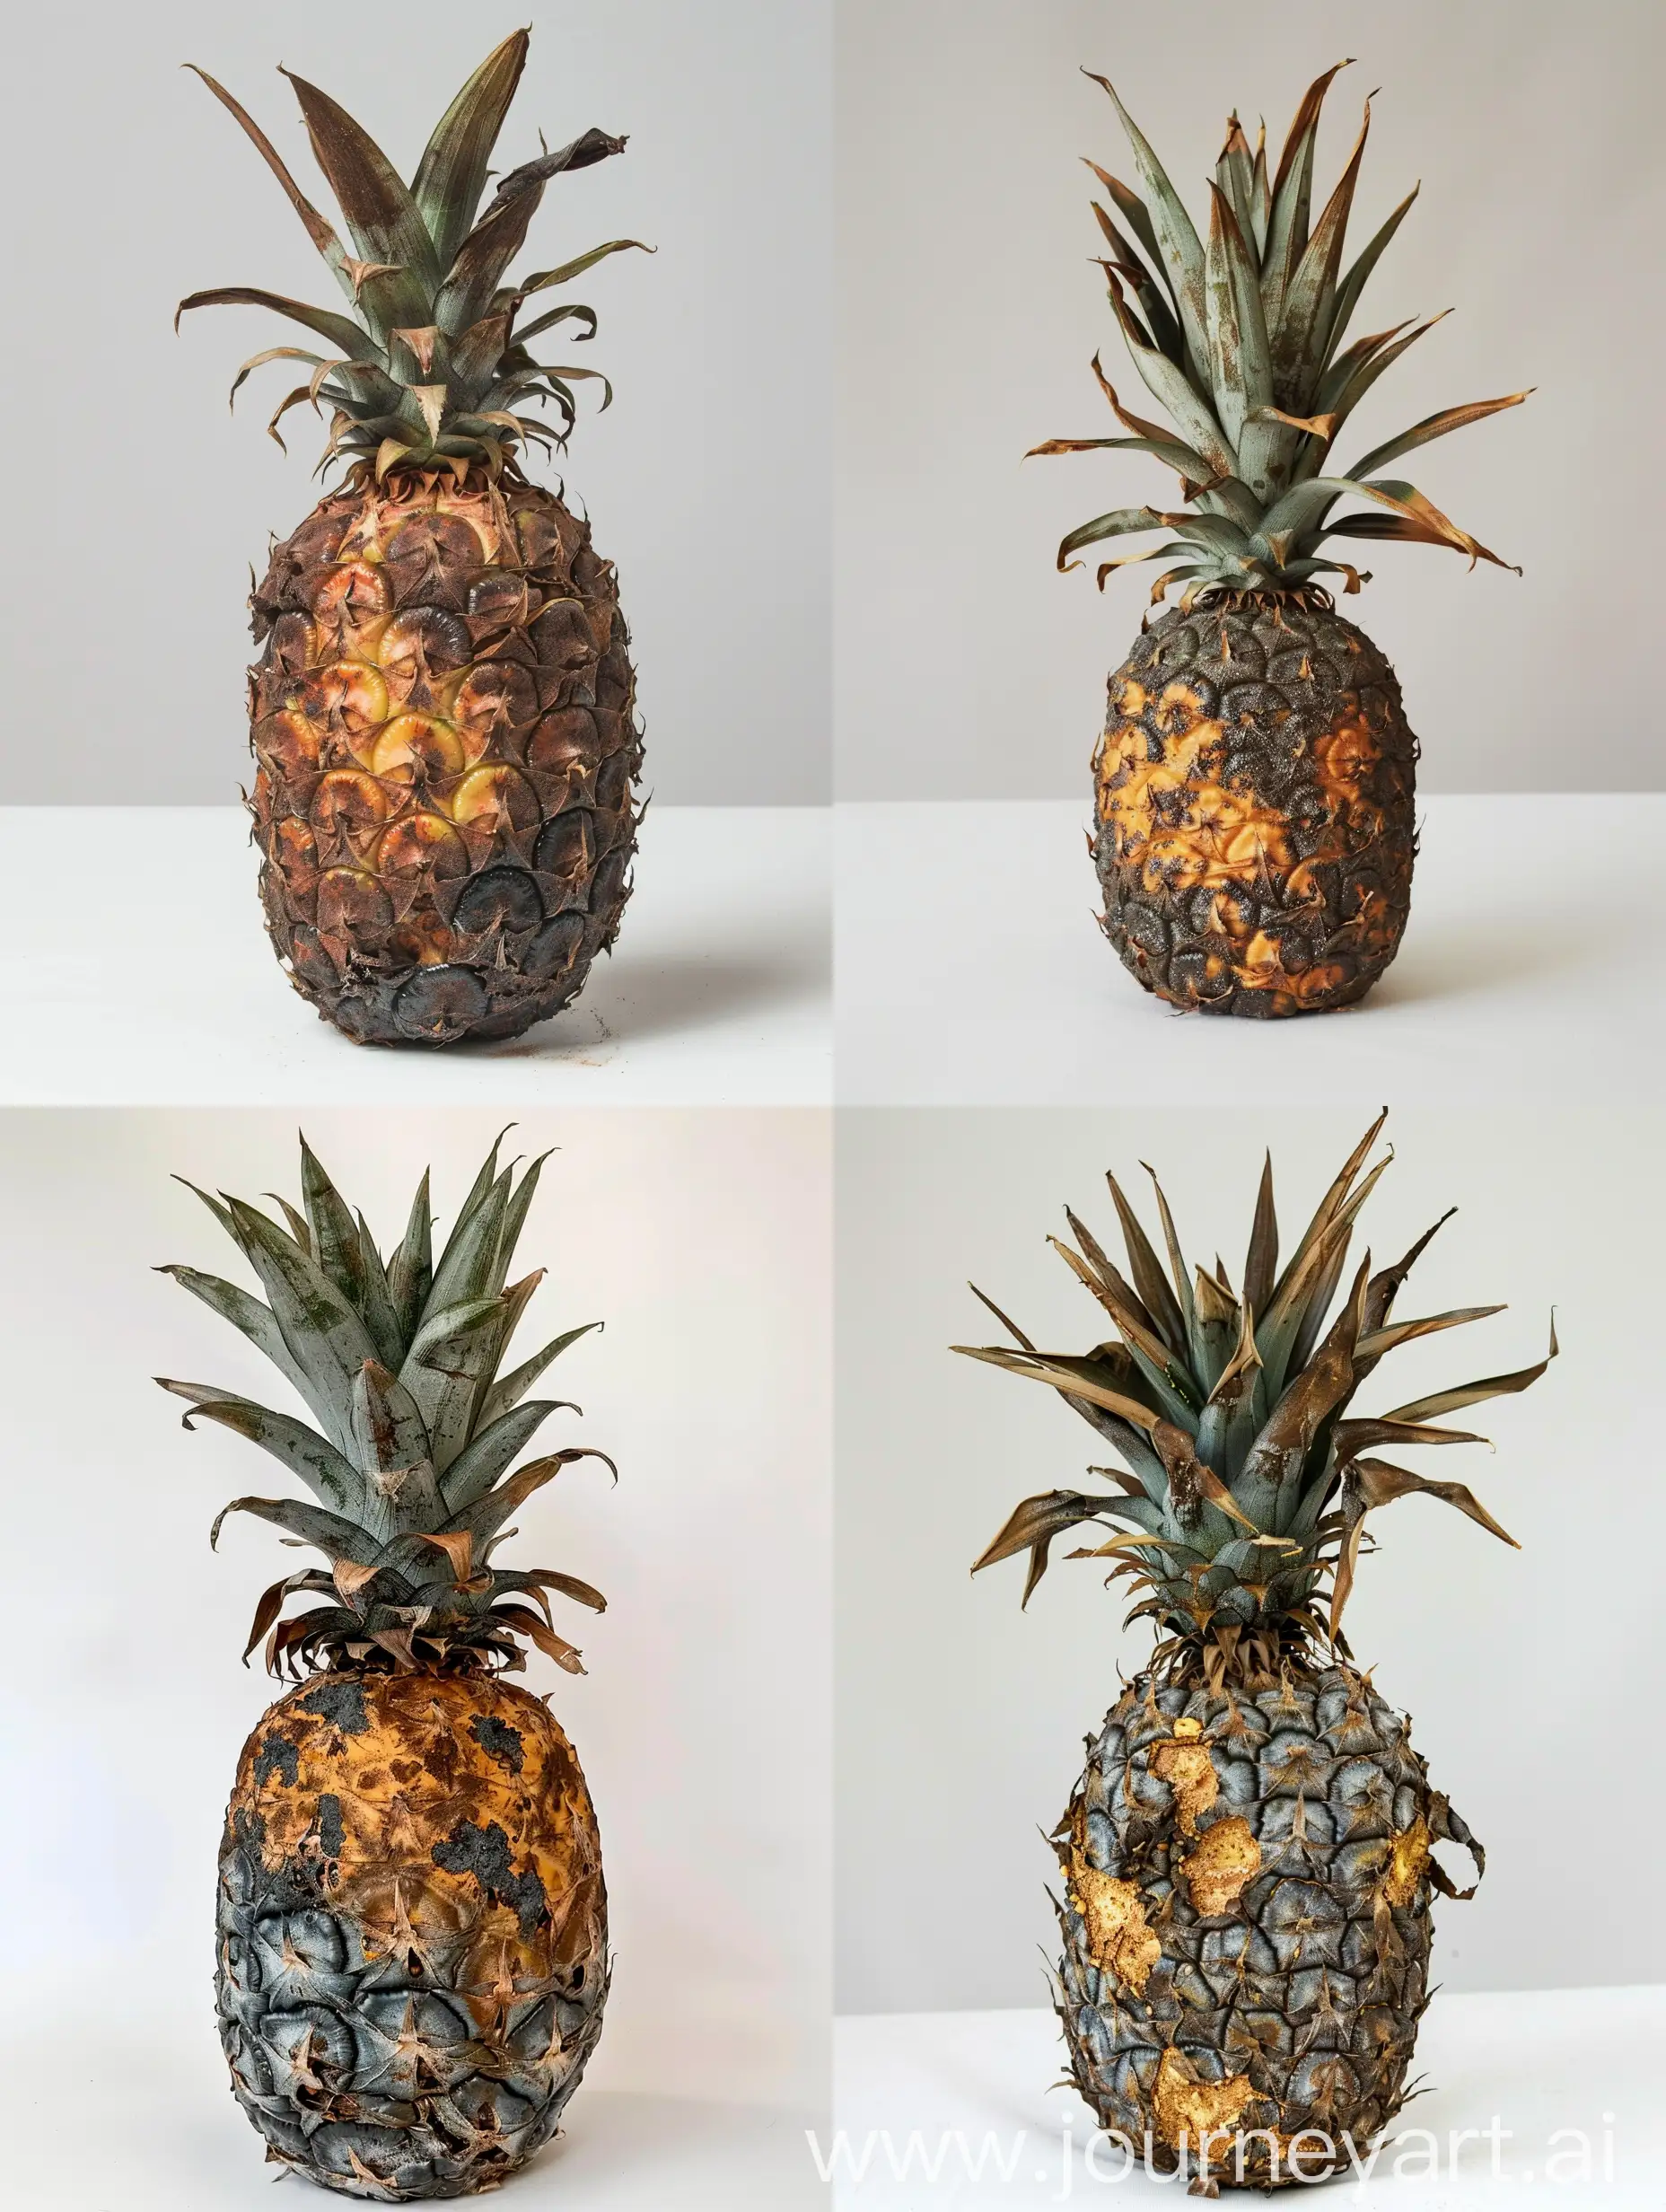 Rustic-Pineapple-Artwork-with-Vintage-Vibes